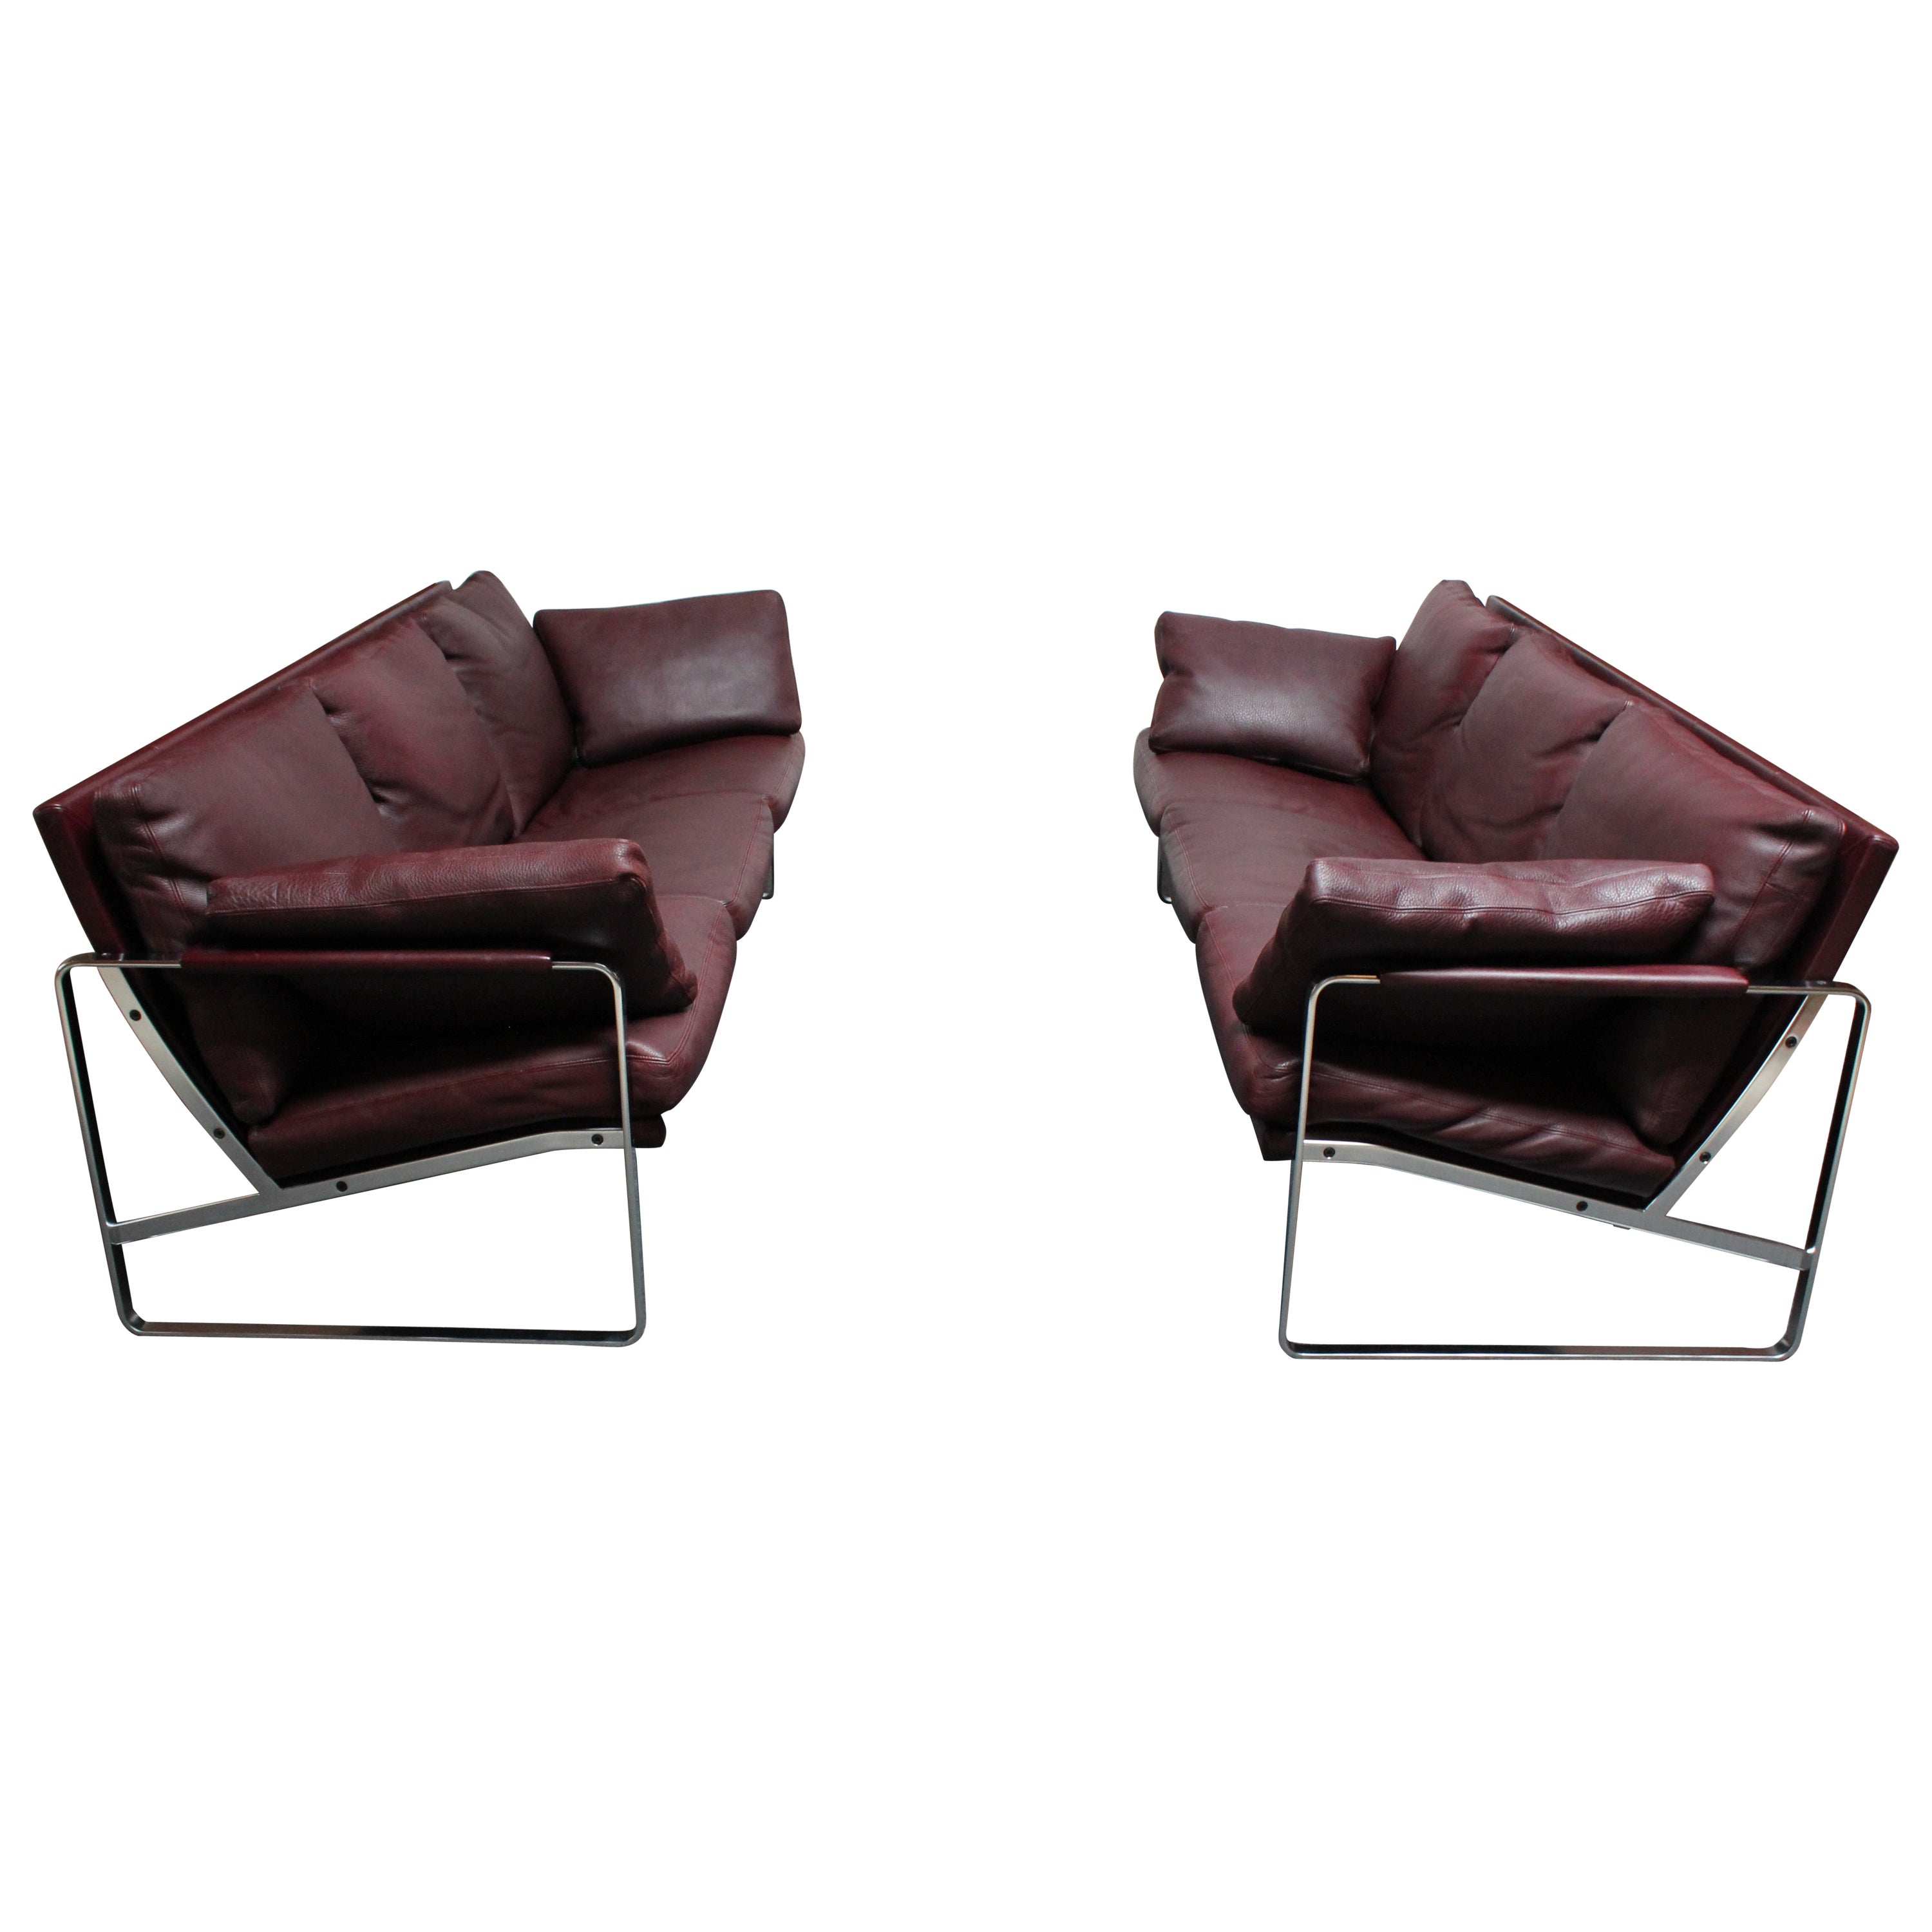 Cordovan Leather and Chrome-Steel Sofa by Preben Fabricius for Walter Knoll